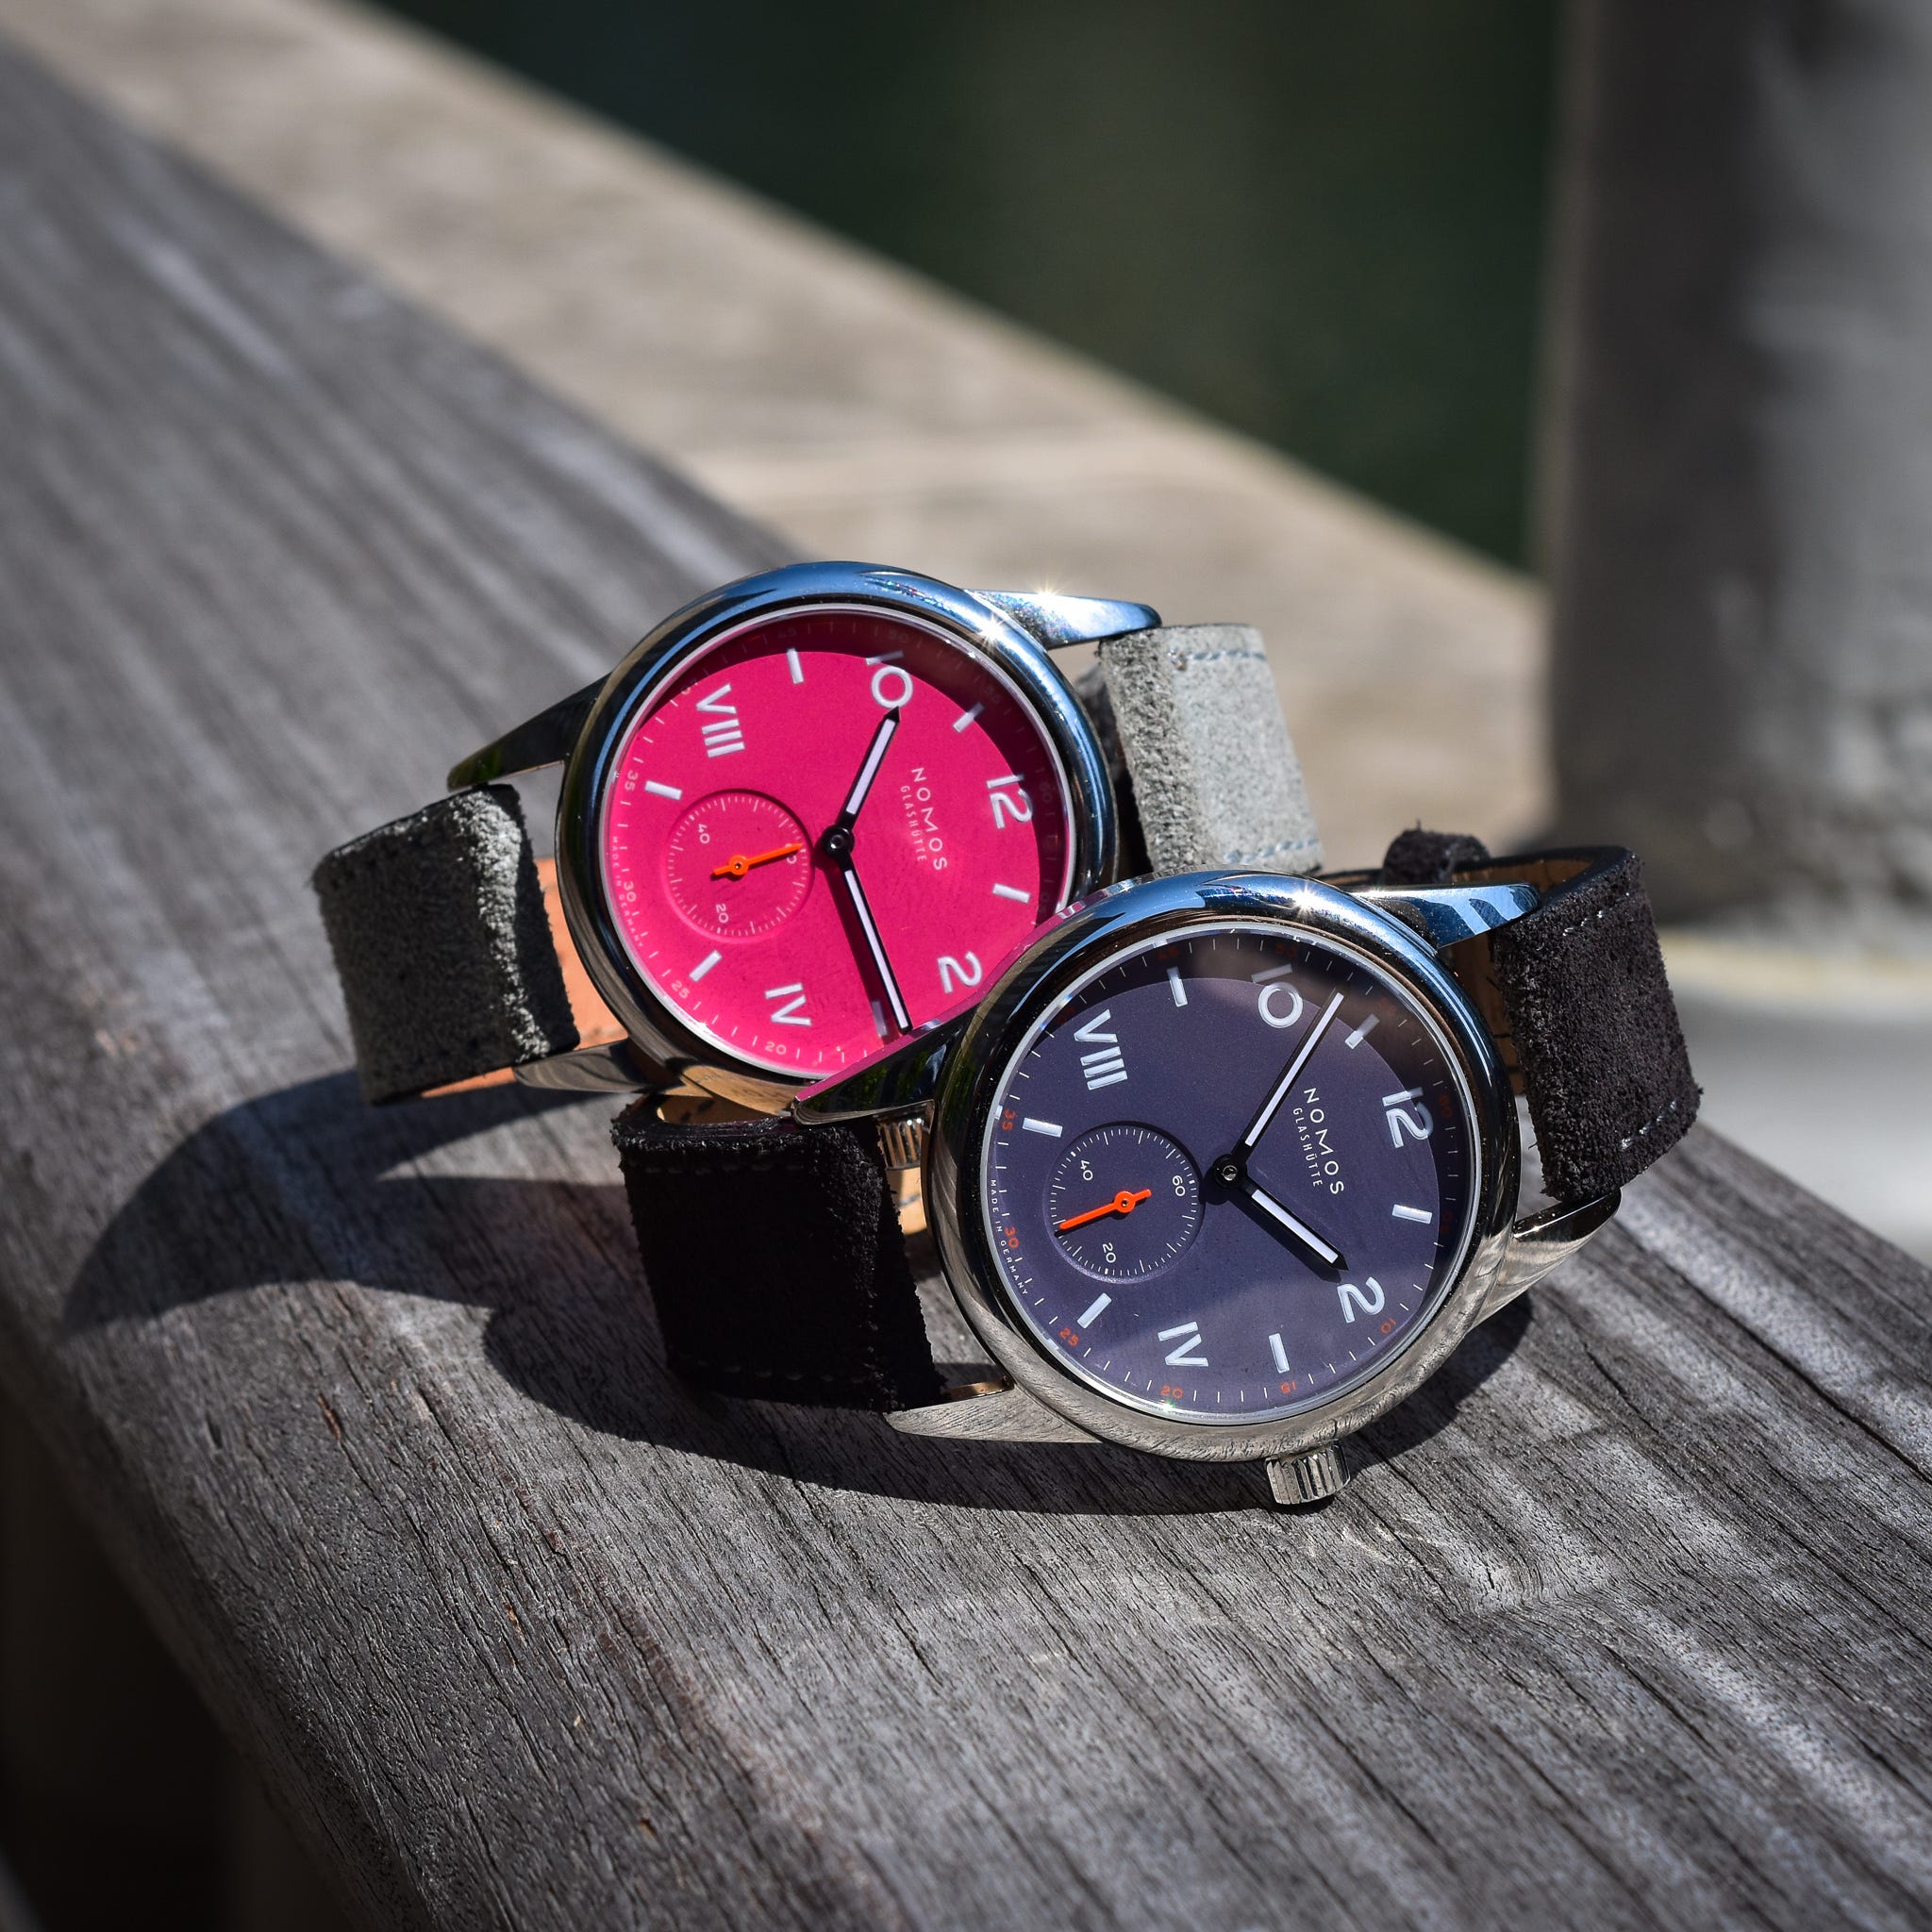 Hands-On: Nomos Club Campus in Pink and Purple